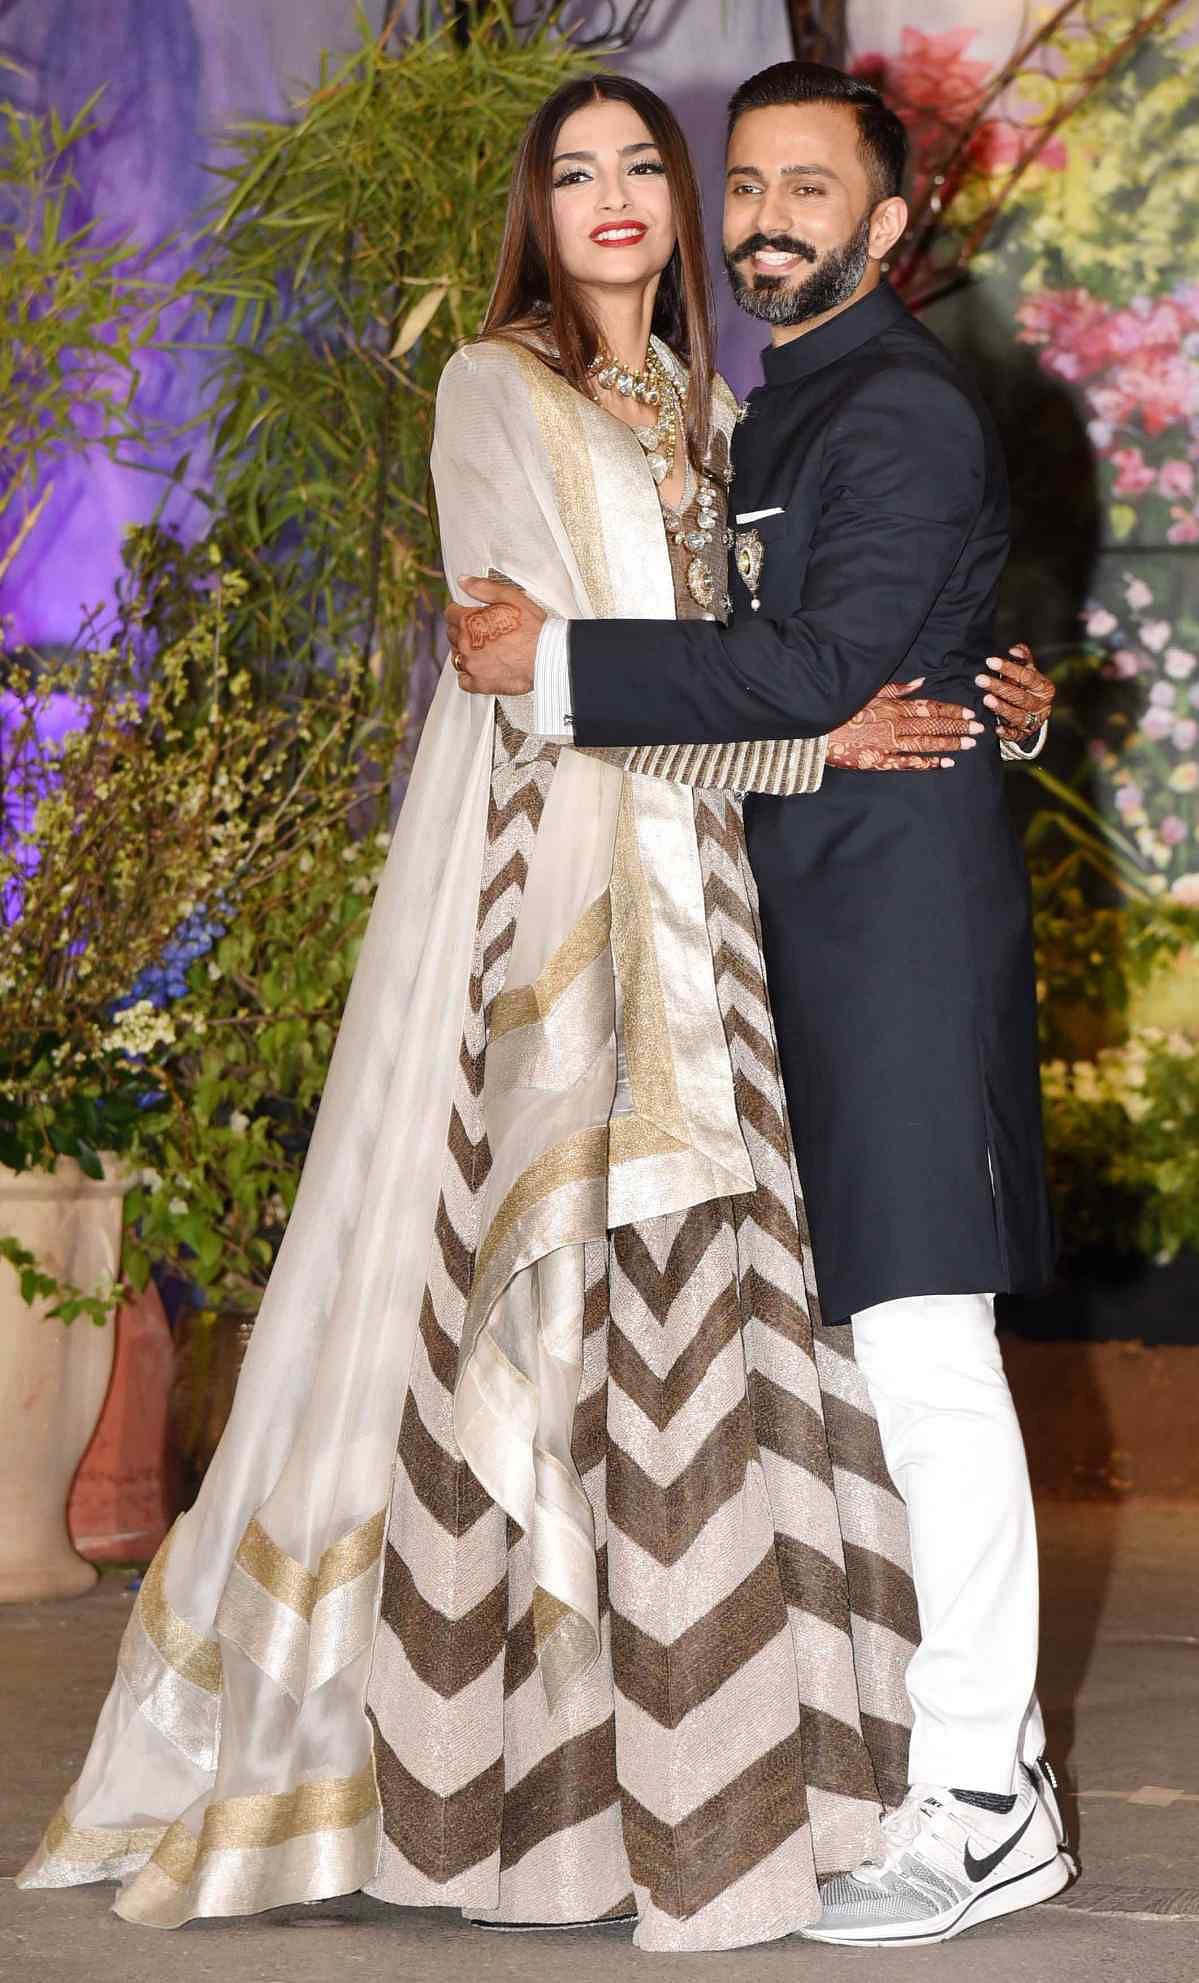 Be like Sonam Kapoor Ahuja and laugh throughout your wedding! 